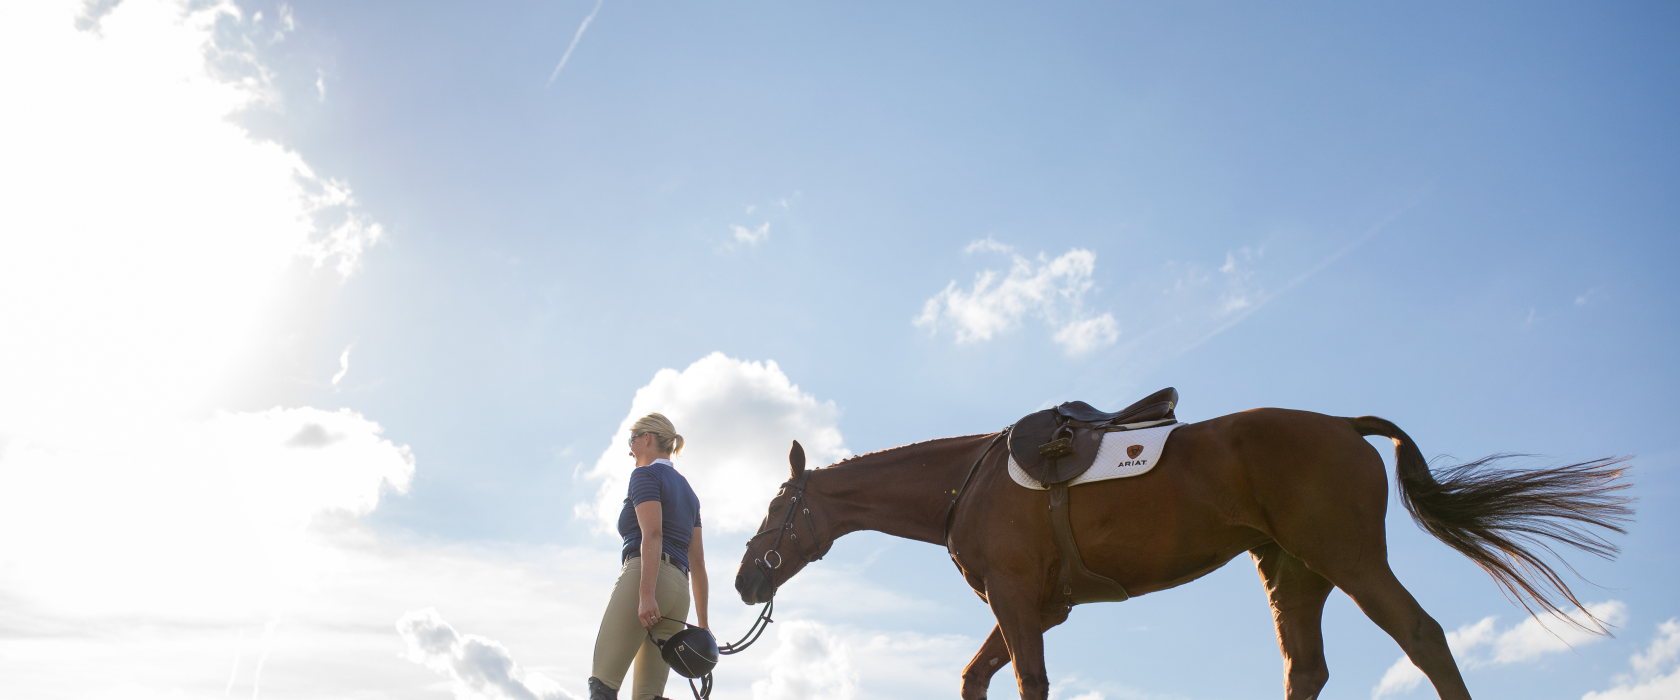 woman in Ariat English wear leading a horse against a blue sky